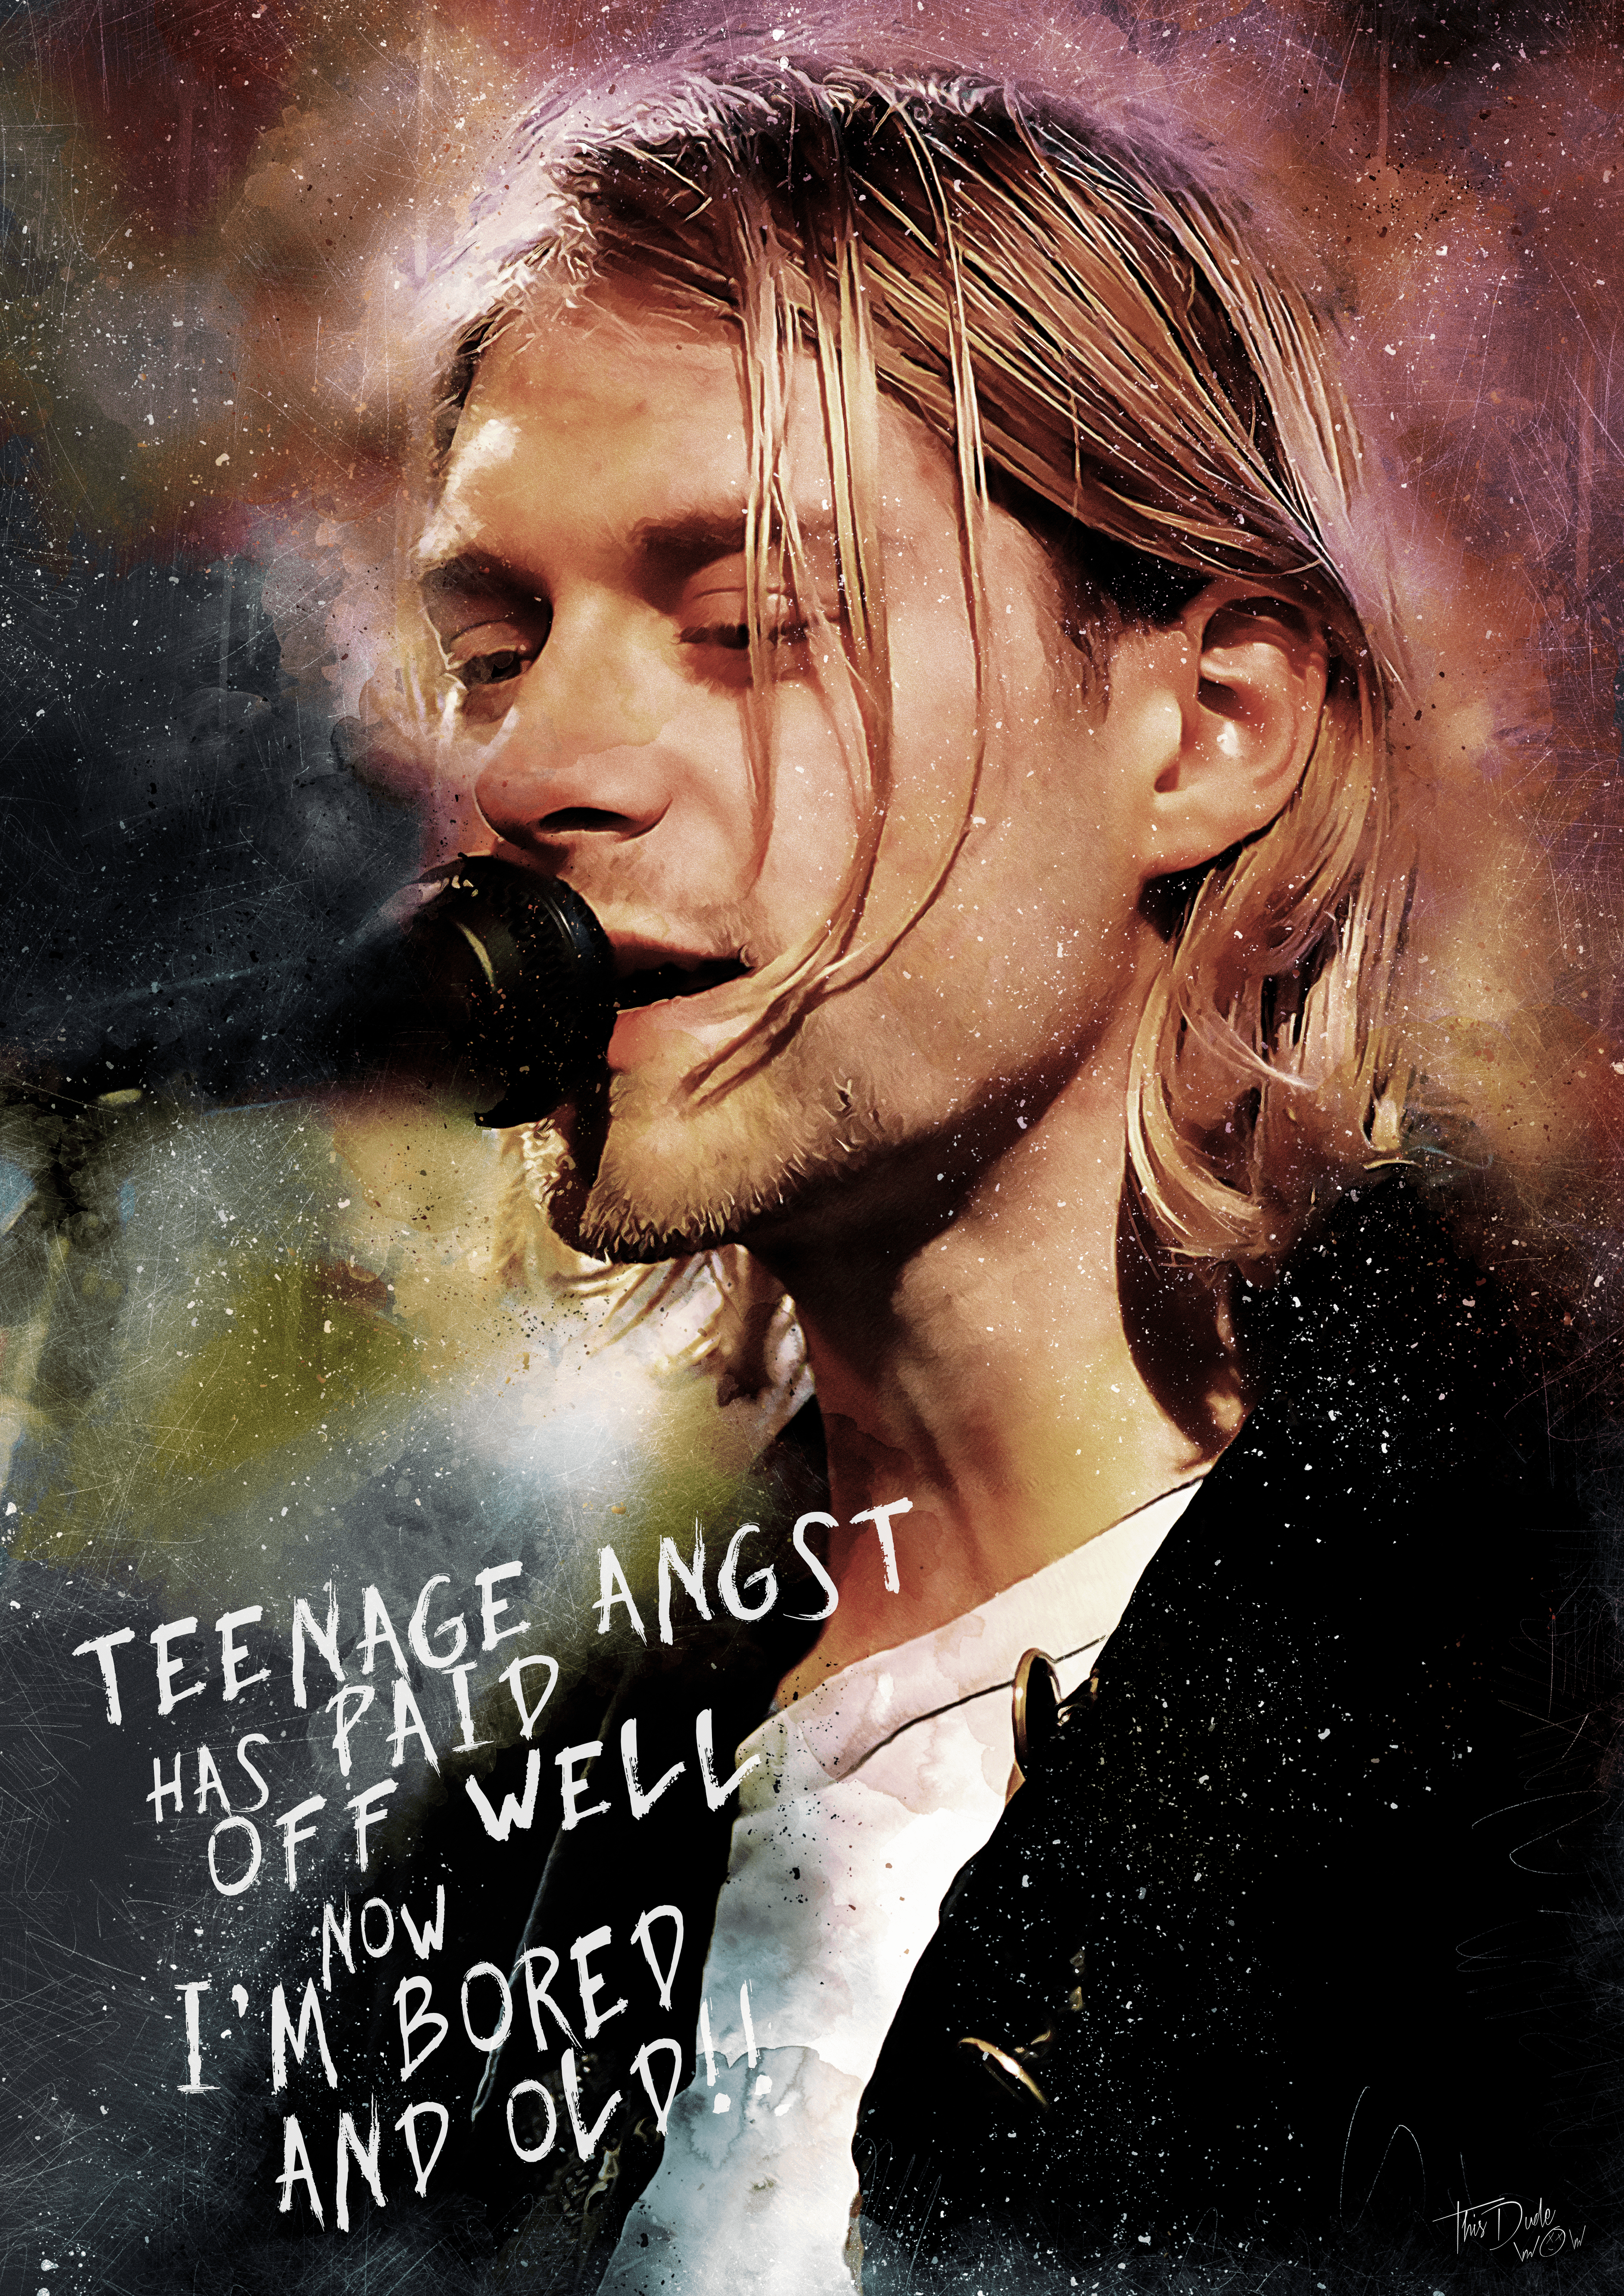 Kurt Cobain In Space" Teenage Angst Has Paid Off Well"